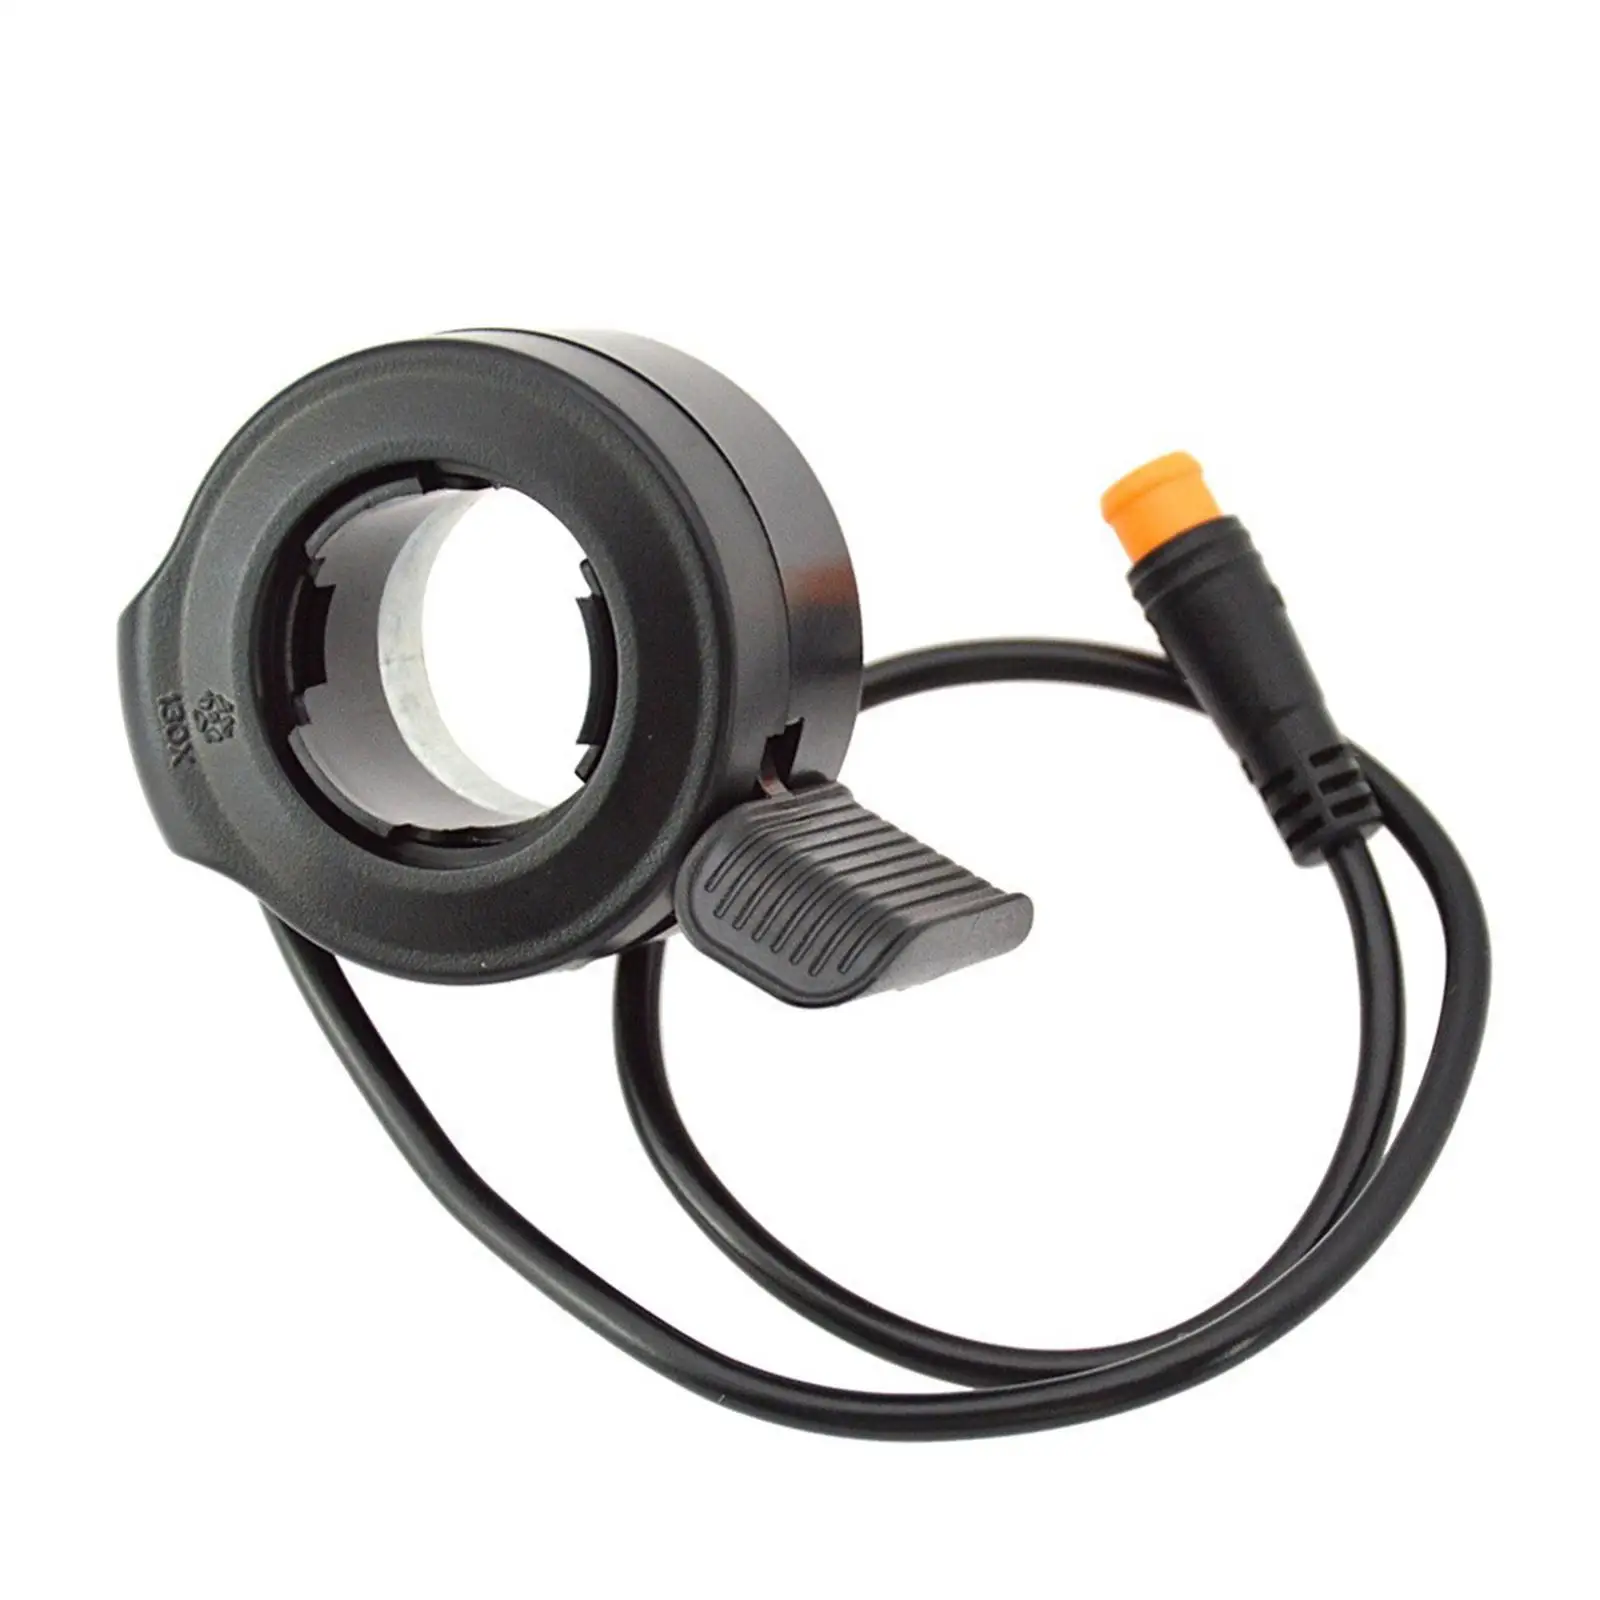 Thumb Throttle Speed Control 130x Thumb Throttle Left Right Universal Speed Controller Waterproof Hand Accessories